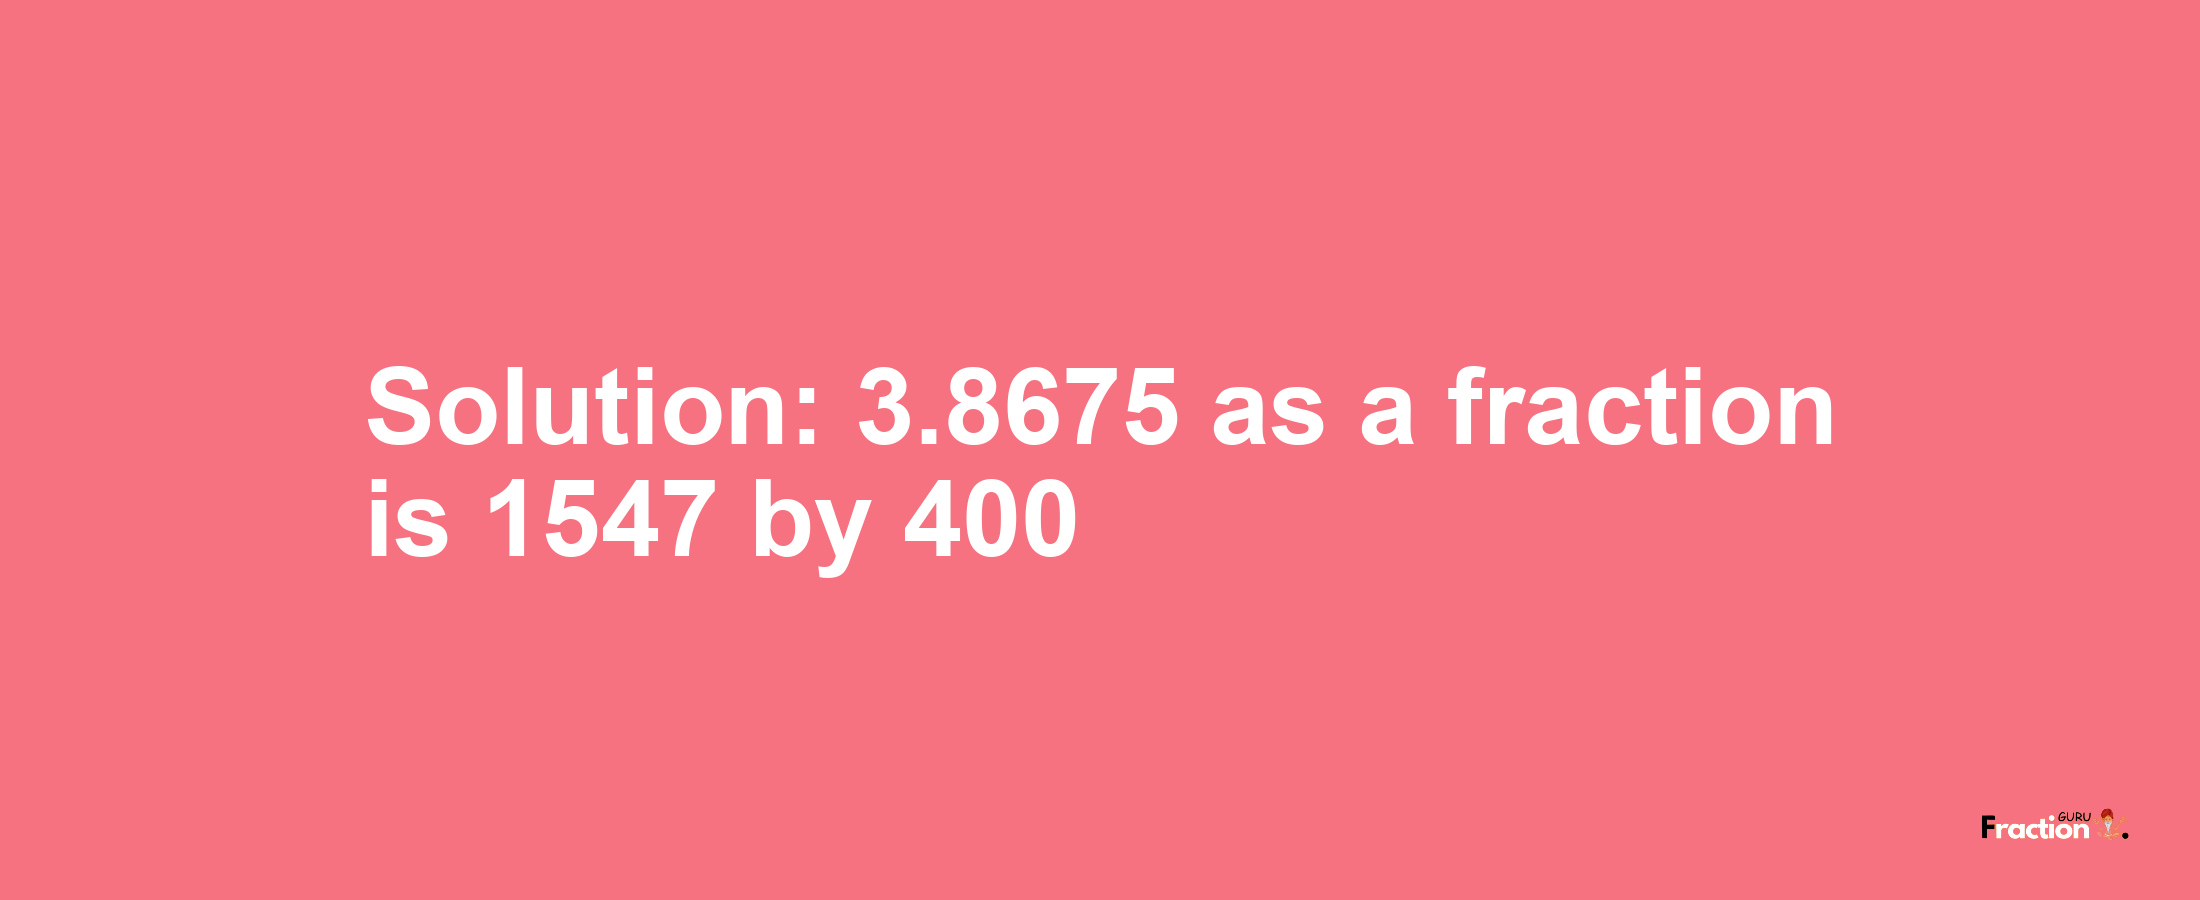 Solution:3.8675 as a fraction is 1547/400